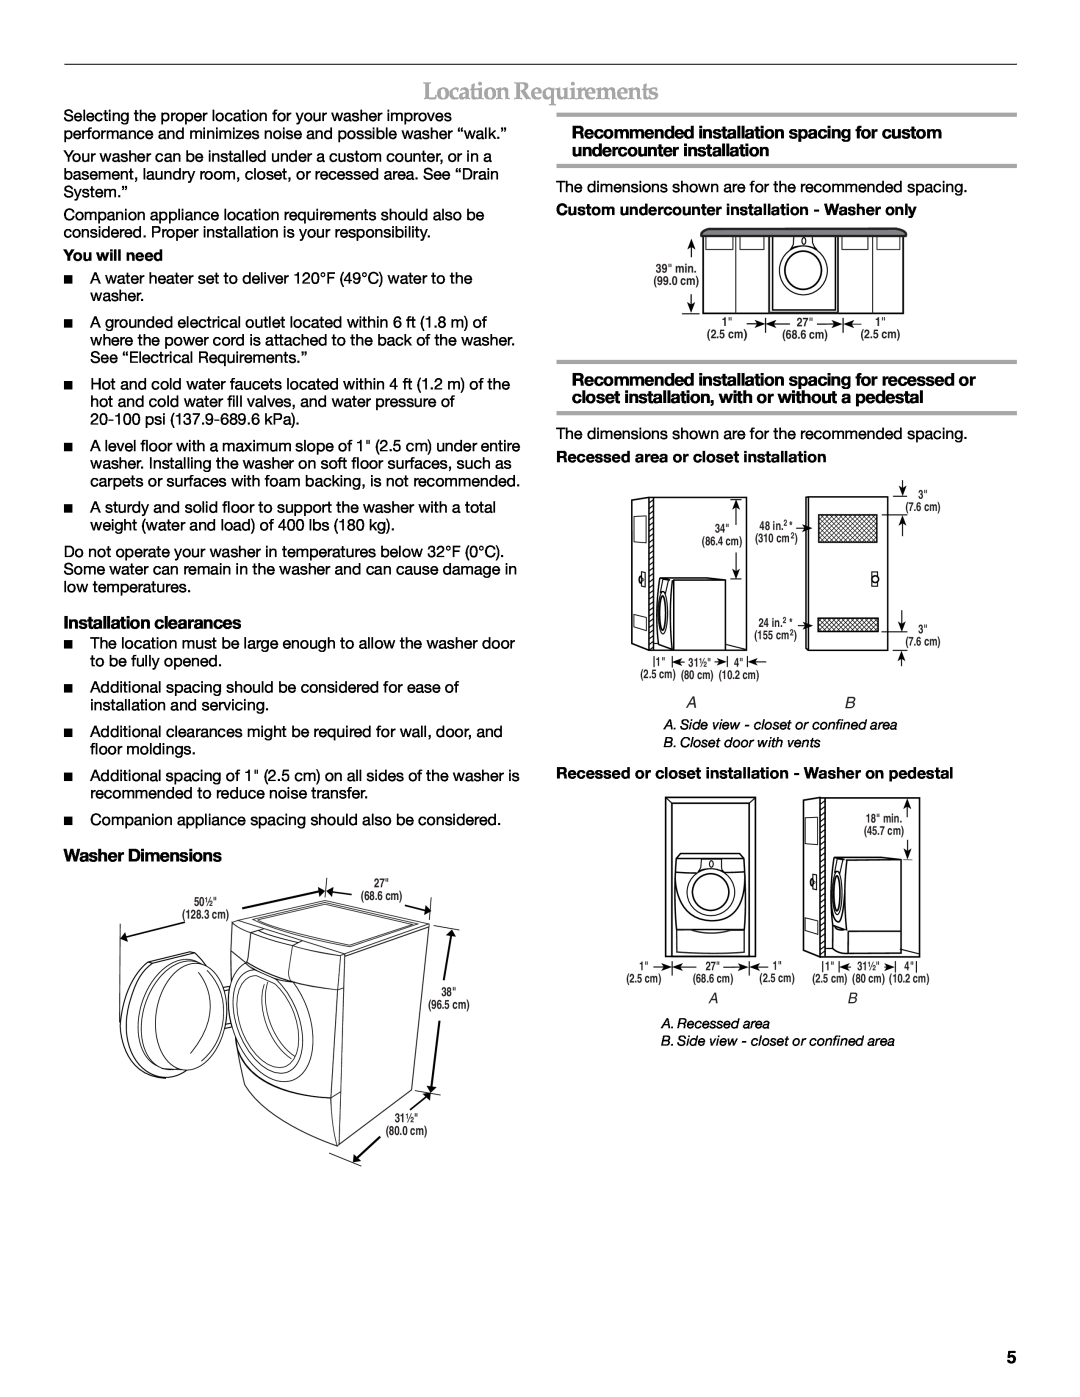 Maytag 8182969 manual Location Requirements, Installation clearances, Washer Dimensions 